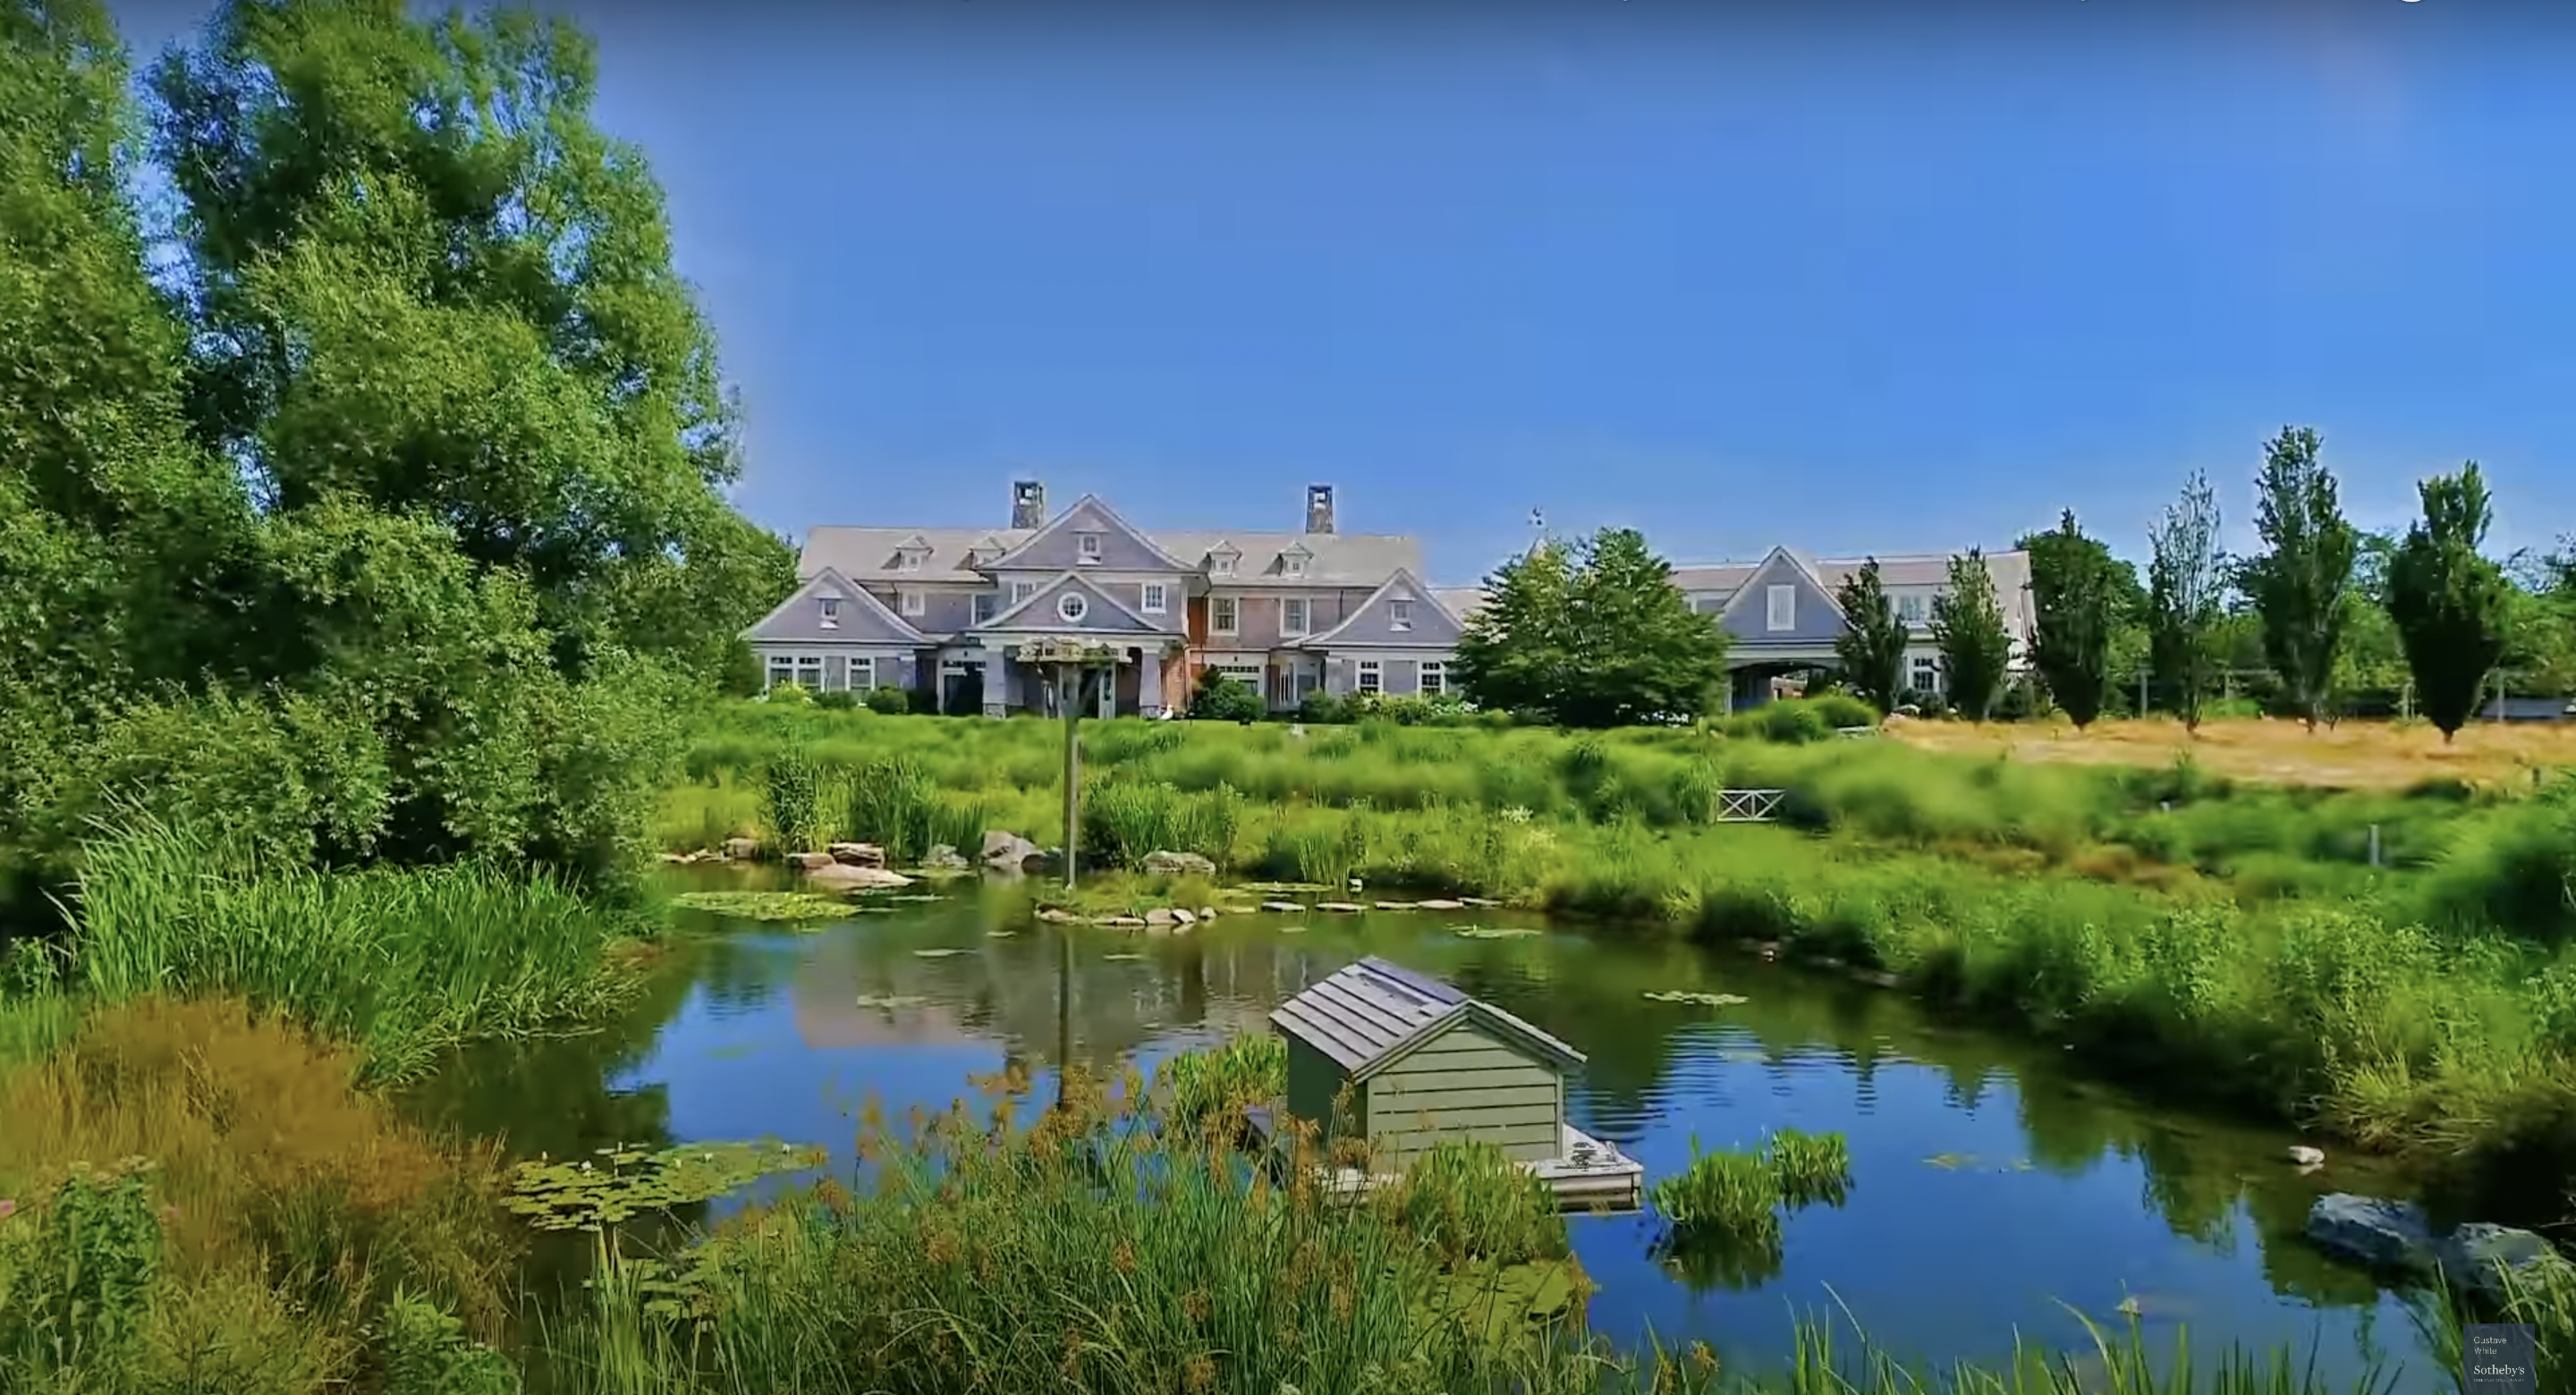 Judge Judy's home in Newport, Rhode Island | Source: Youtube.com/Gustave White Sotheby's International Realty